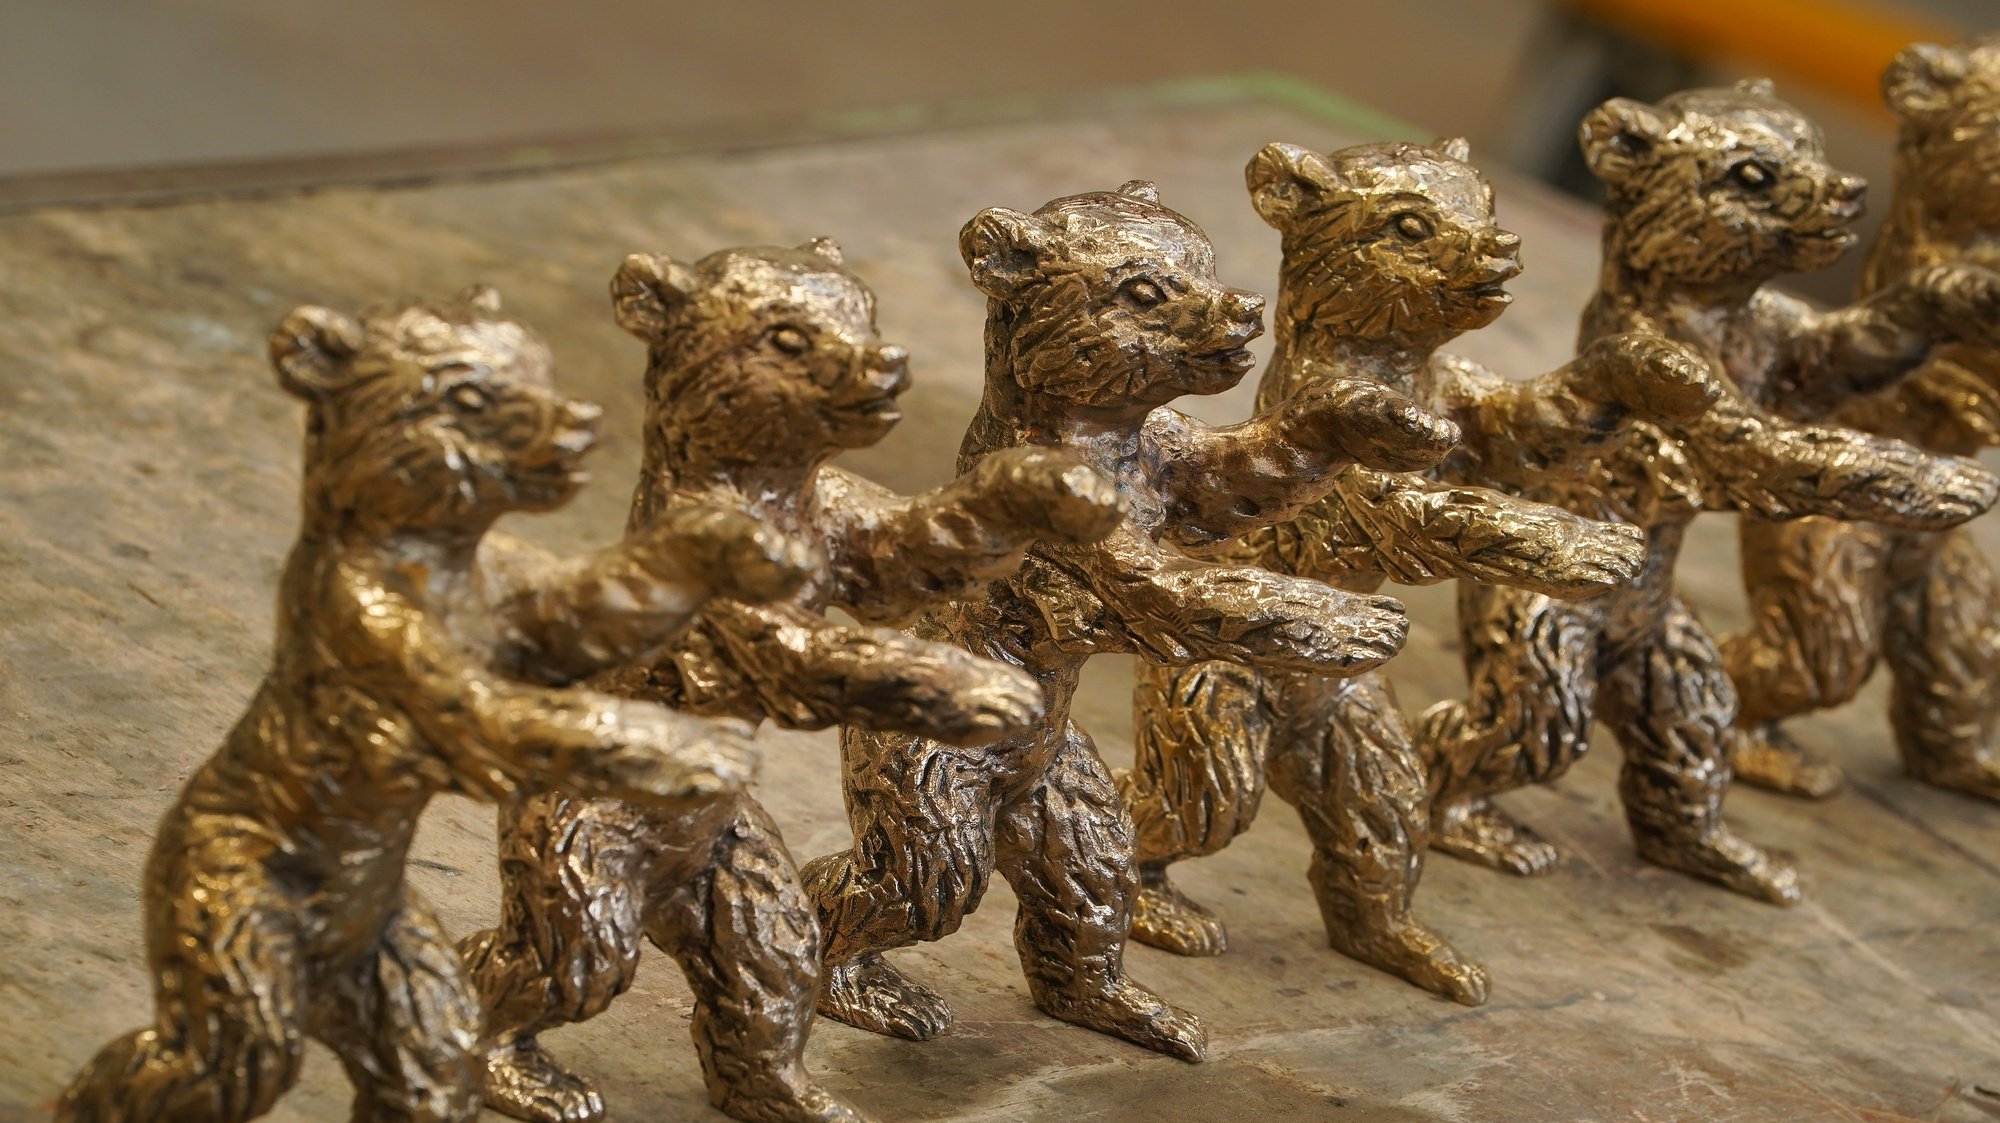 epa09018243 Nearly-finished Berlinale bear trophies for the 71st Berlin International Film Festival stand in a workshop at the Hermann Noack Bildgiesserei foundry in Berlin, Germany, 17 February 2021. Due to the ongoing coronavirus Covid-19 pandemic, the 2021 Berlinale will be split into two stages. From 01 through 05 March 2021, the festival will hold an online-only event mainly for the international industry. An in-person festival is planned for 09-20 June 2021.  EPA/Sean Gallup / POOL